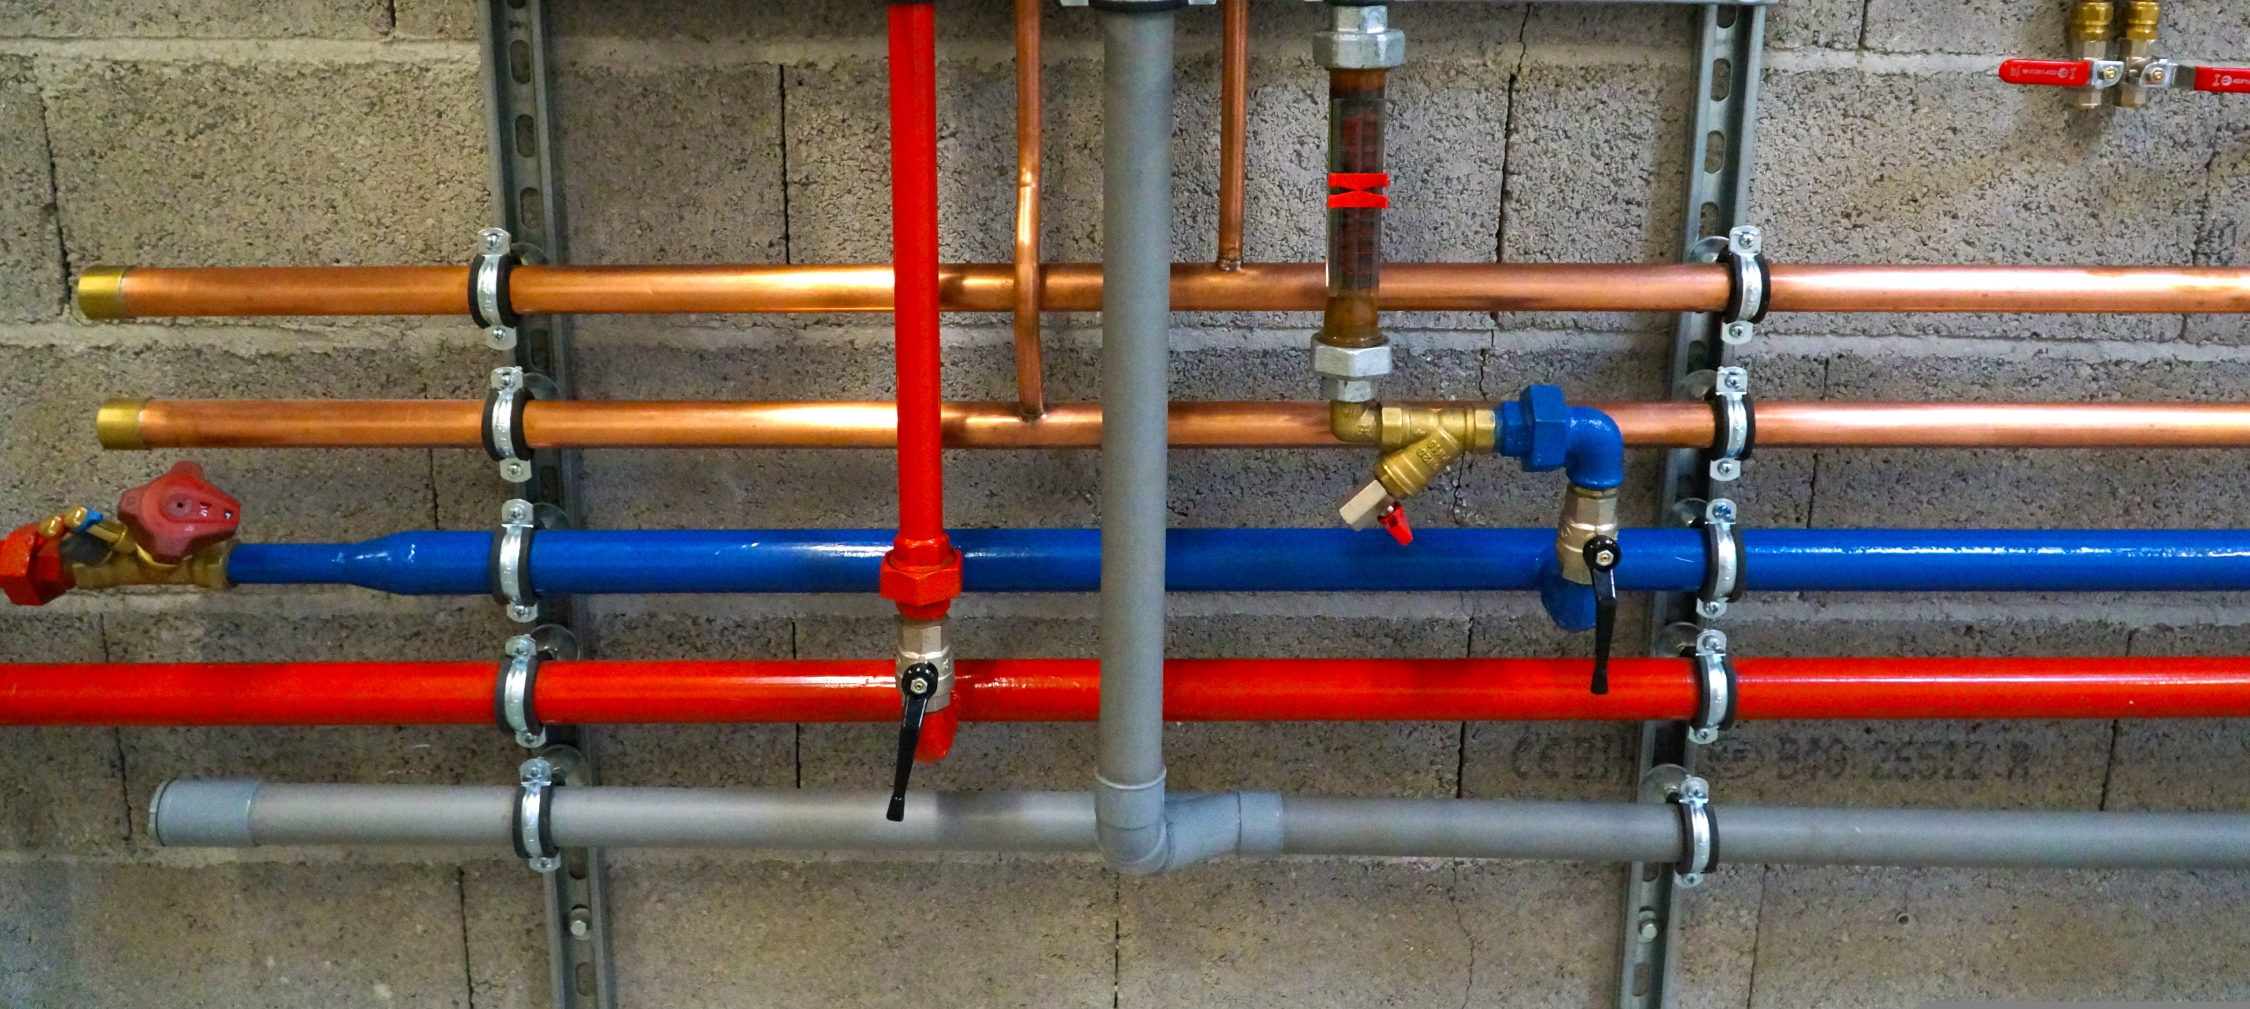 Guide on How to Choose the Right Plumbing Pipe